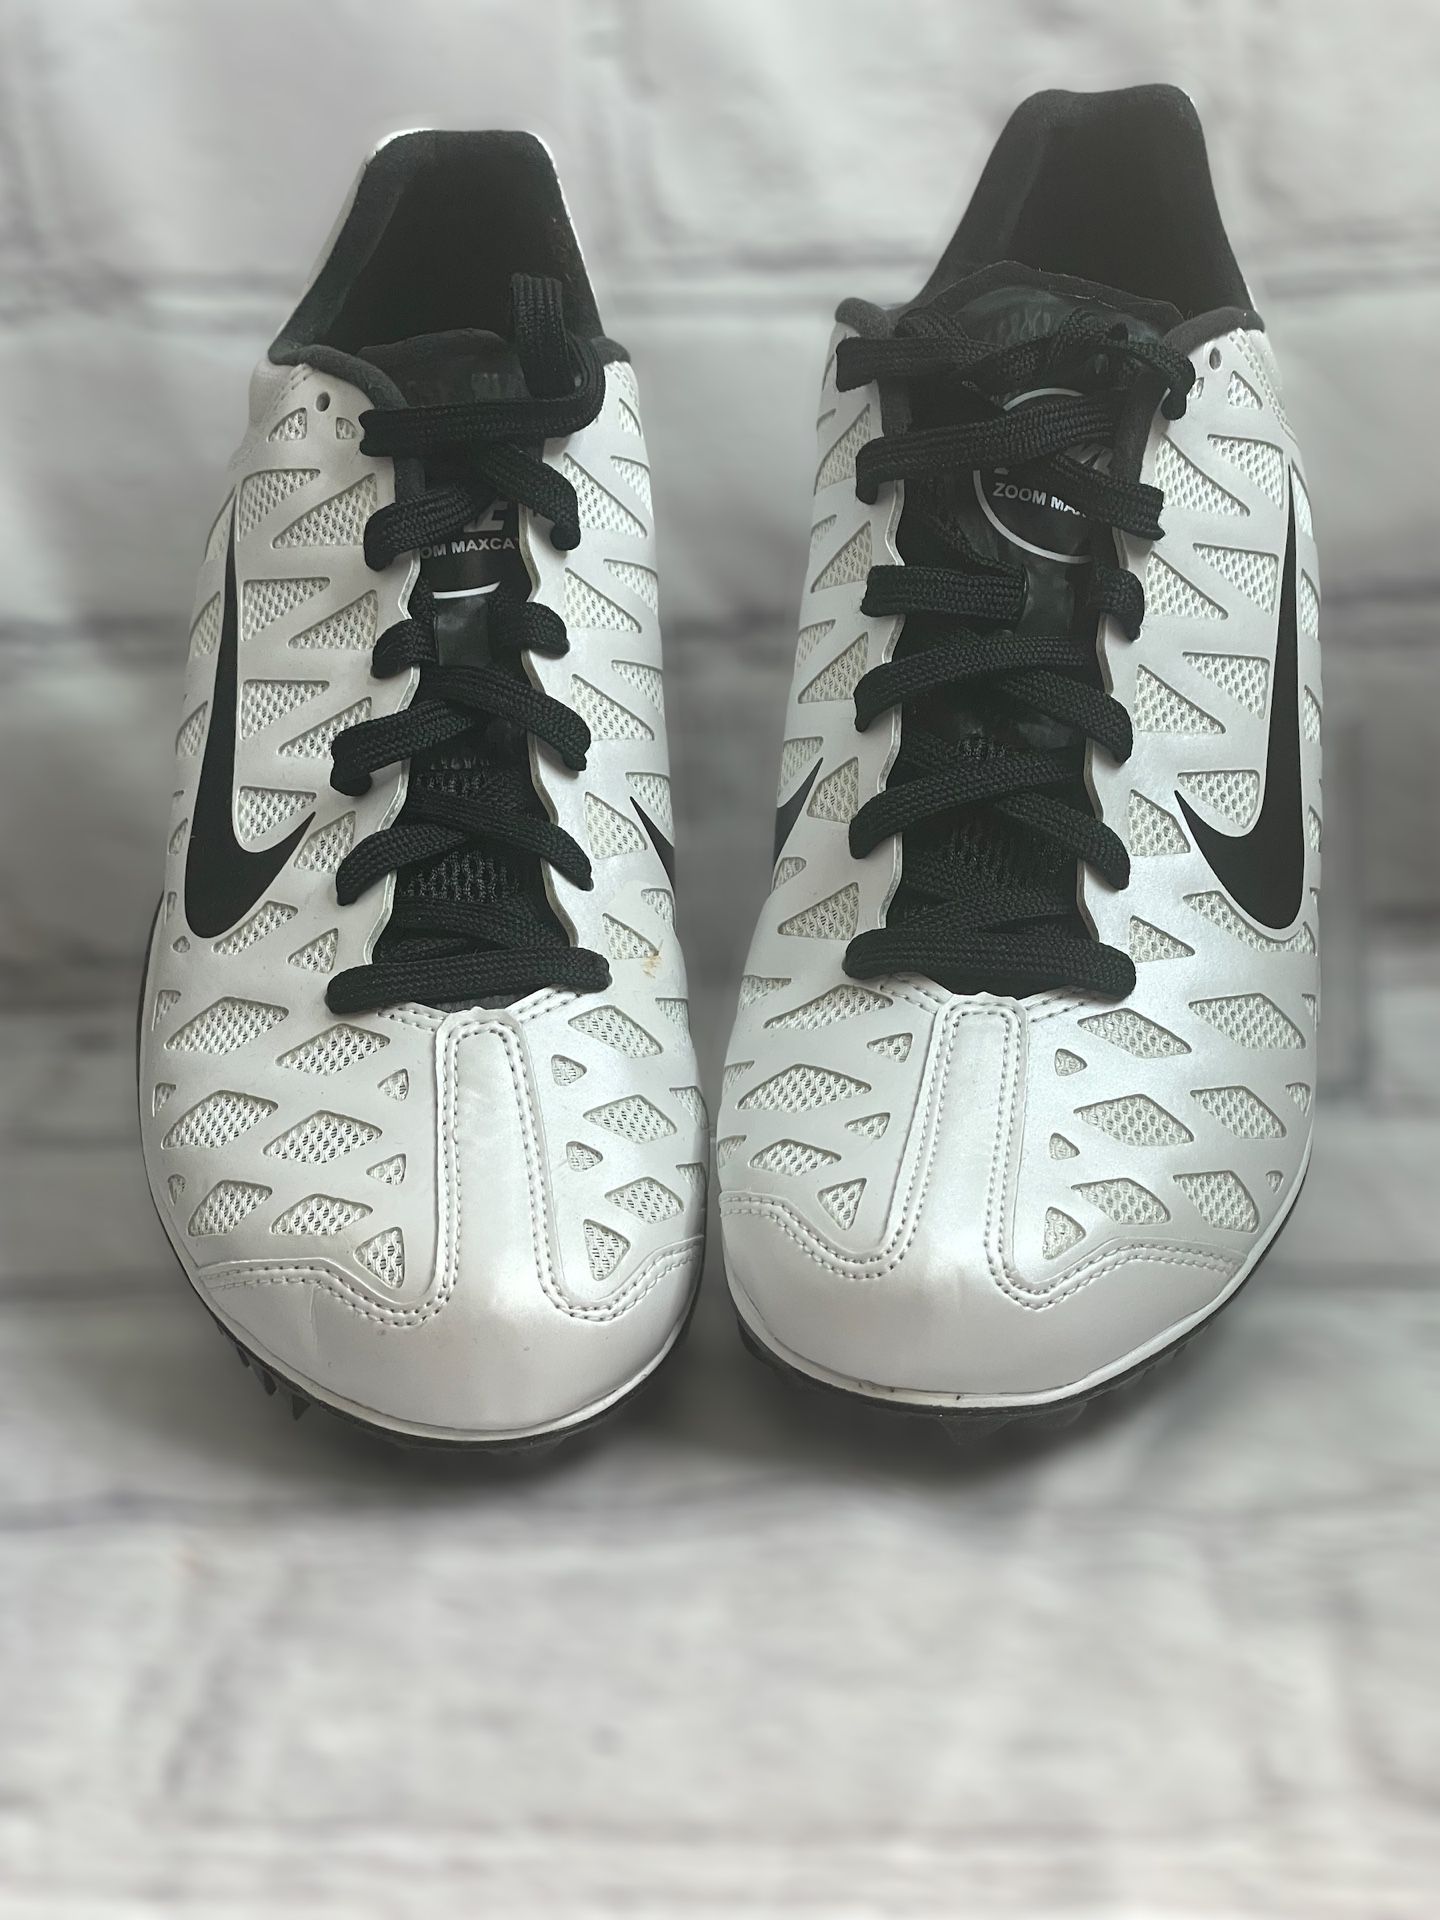 Oficial personal Acechar Nike Zoom Maxcat 4 Sprint White Black Track Running Spikes Shoes Men's 9.5  for Sale in Wichita, KS - OfferUp